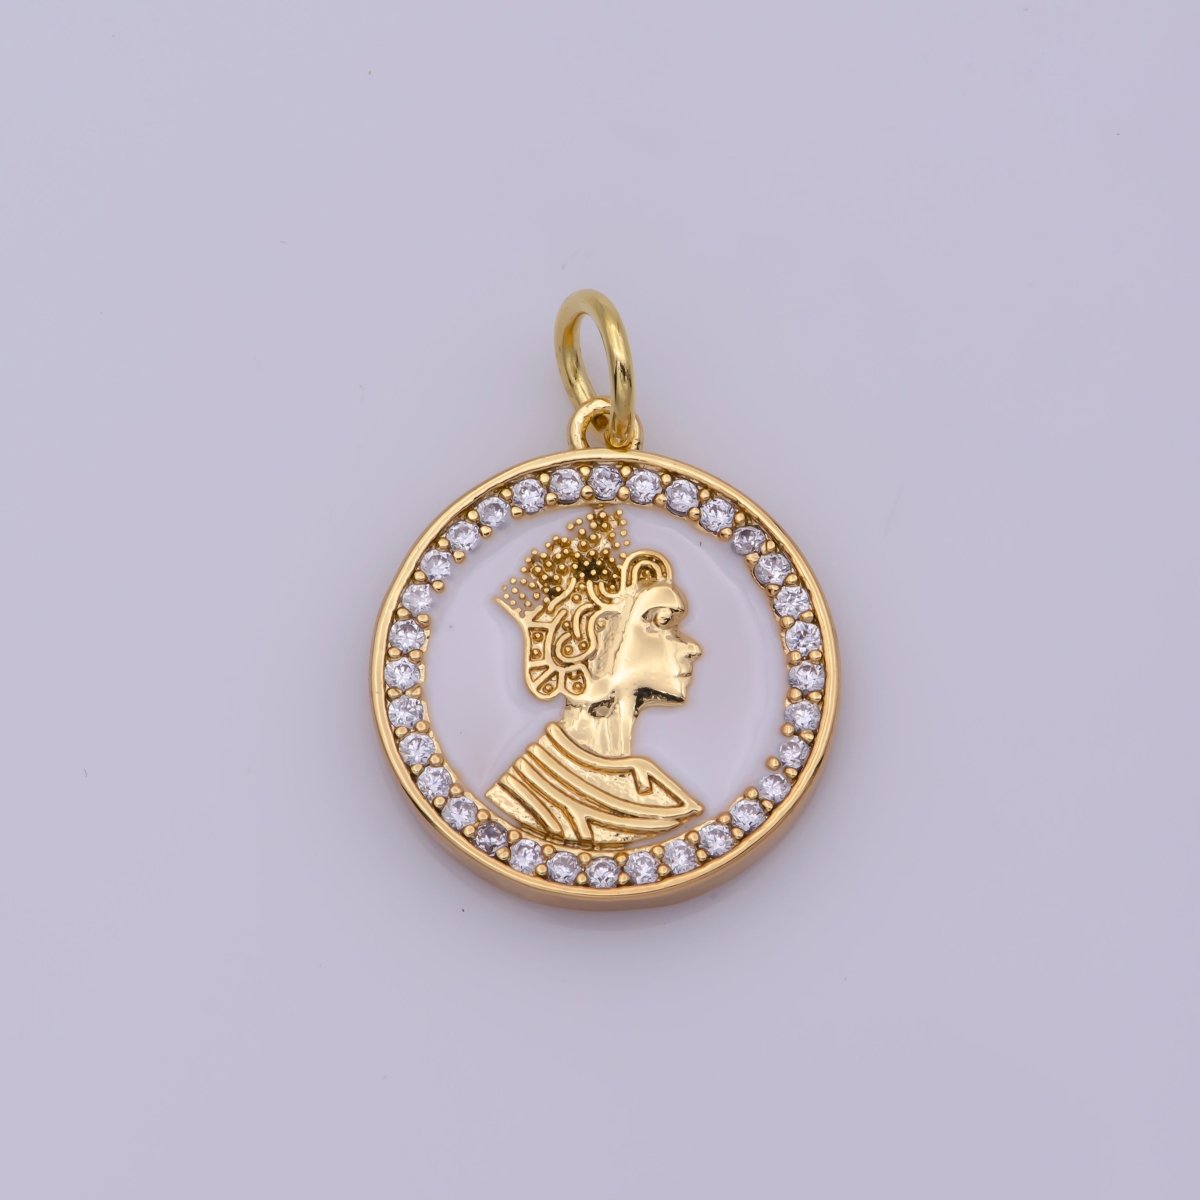 Mini English Queen Elizabeth coin medal 18k Gold Filled coin Charm Micro Pave Enamel White Charm N-199 - DLUXCA